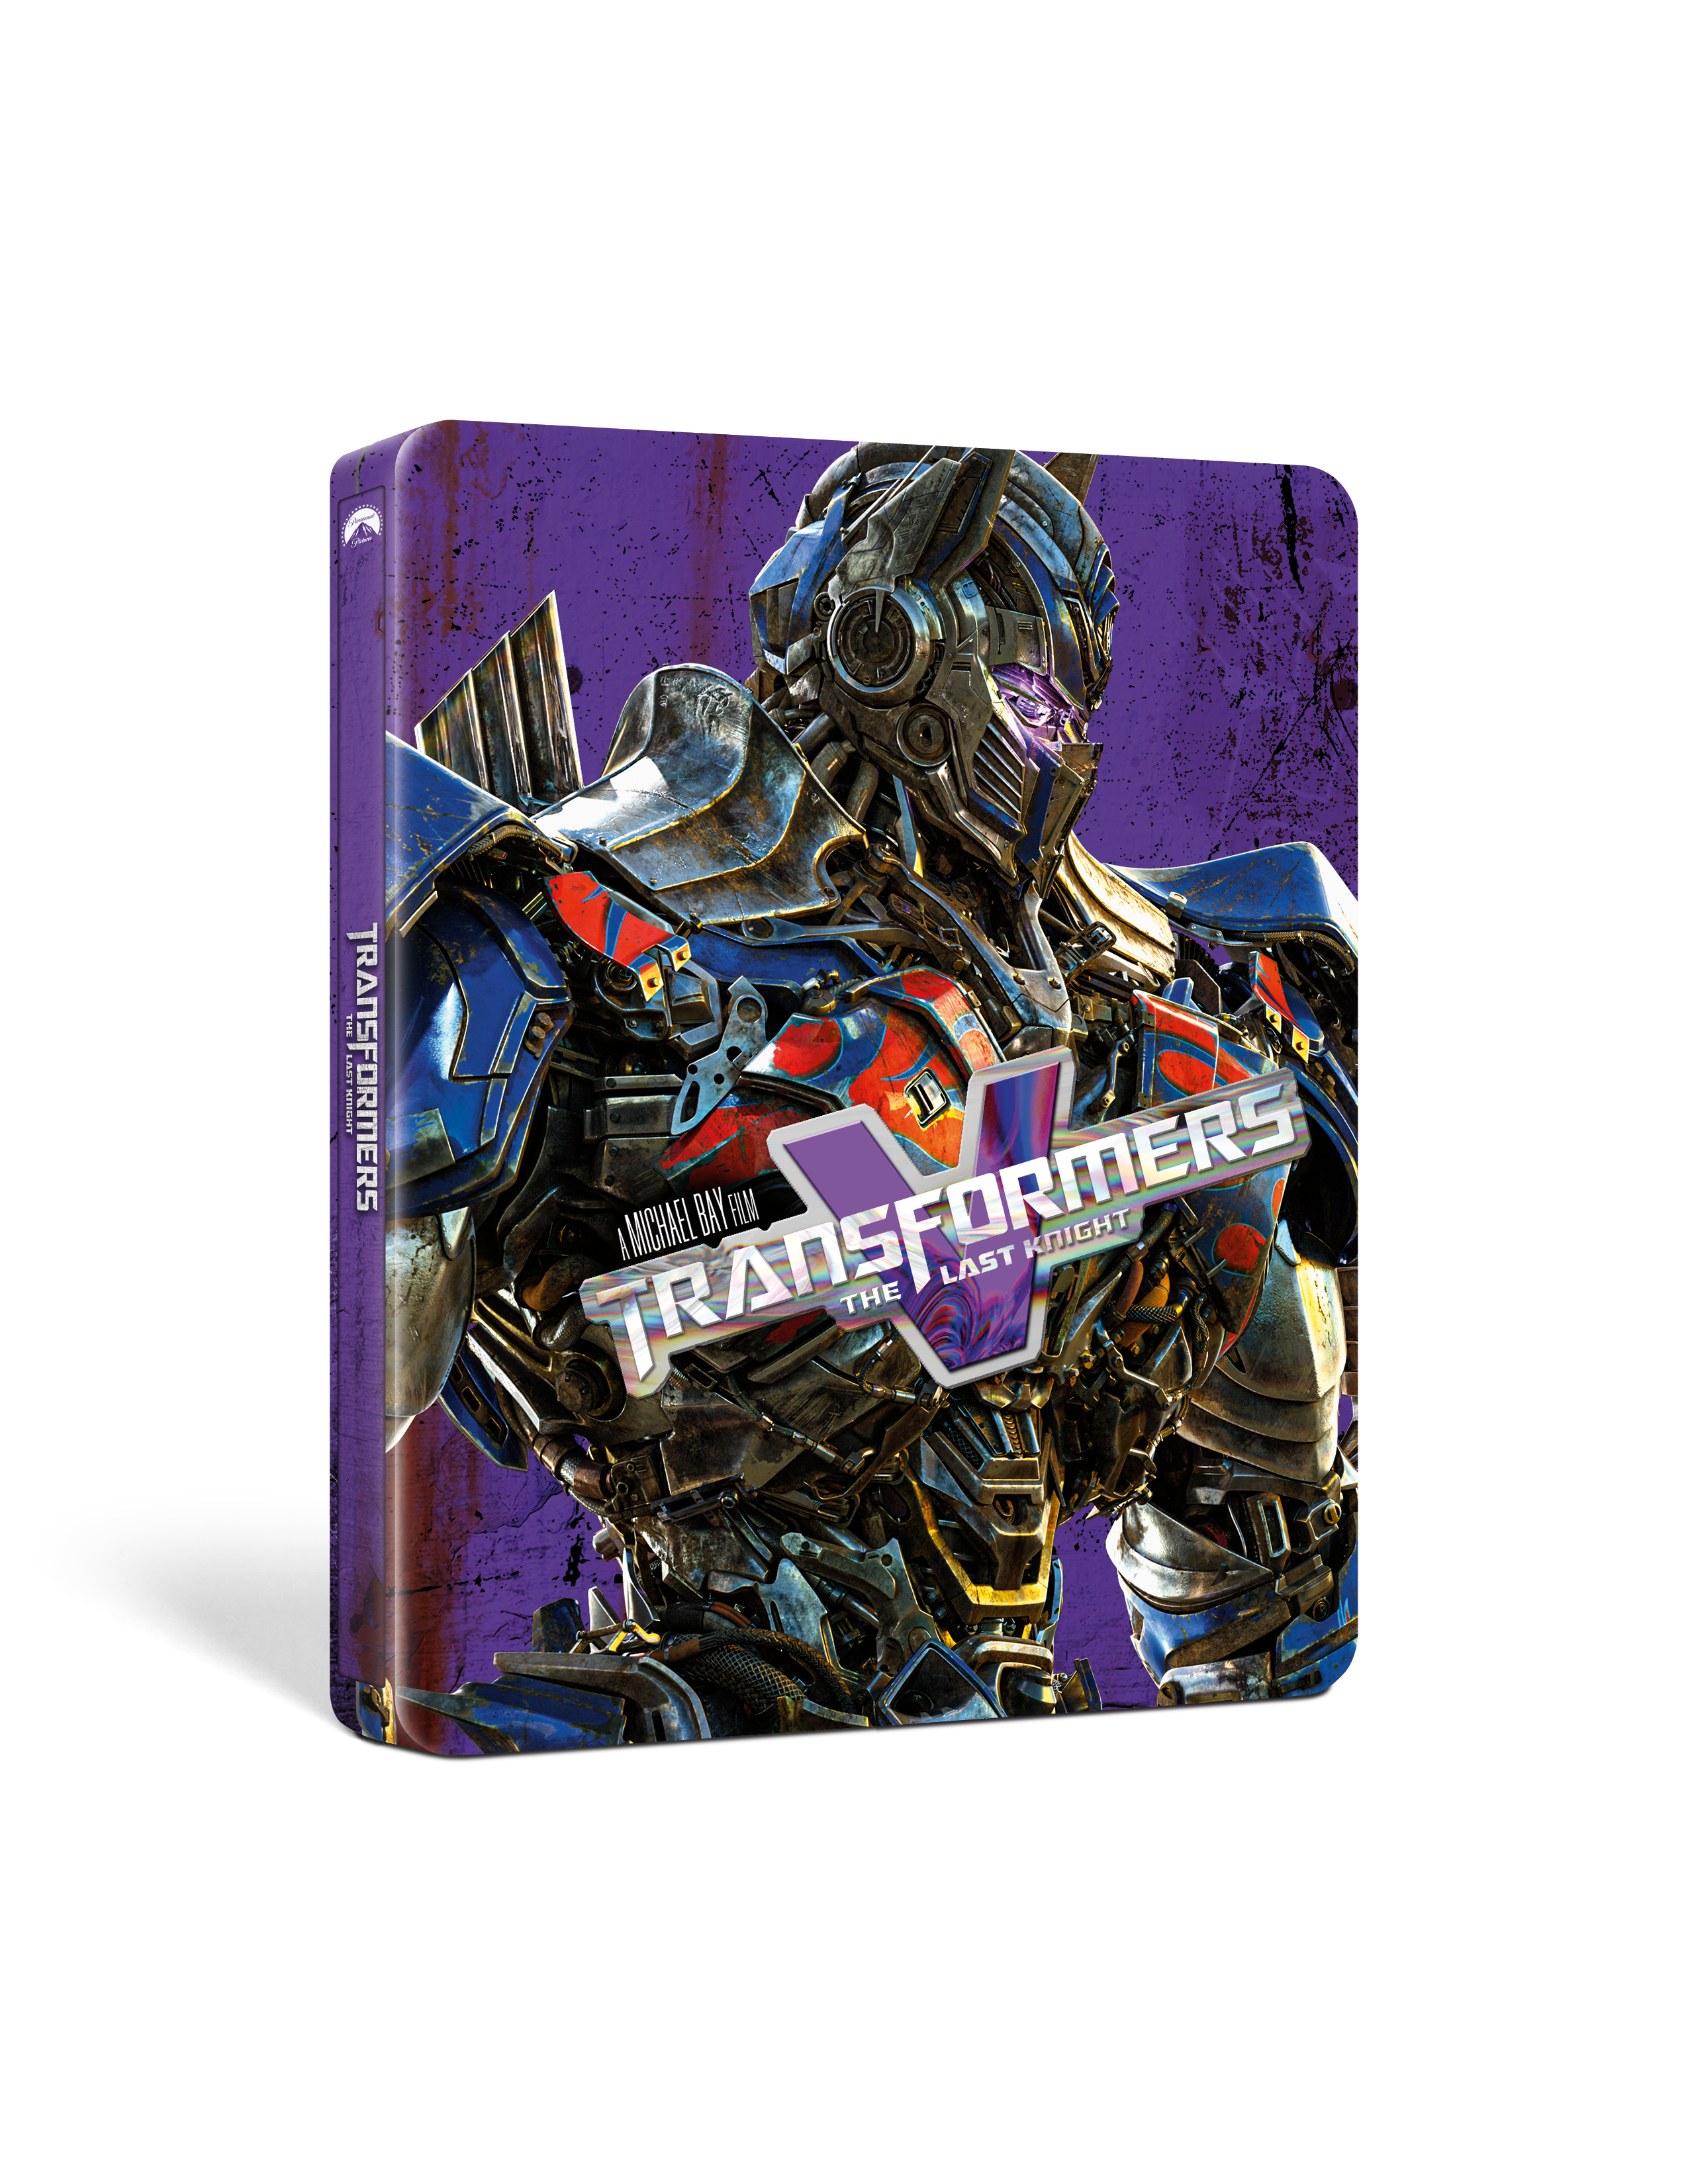 Transformers 6-Movie Collection Steelbook cover (Paramount Pictures)